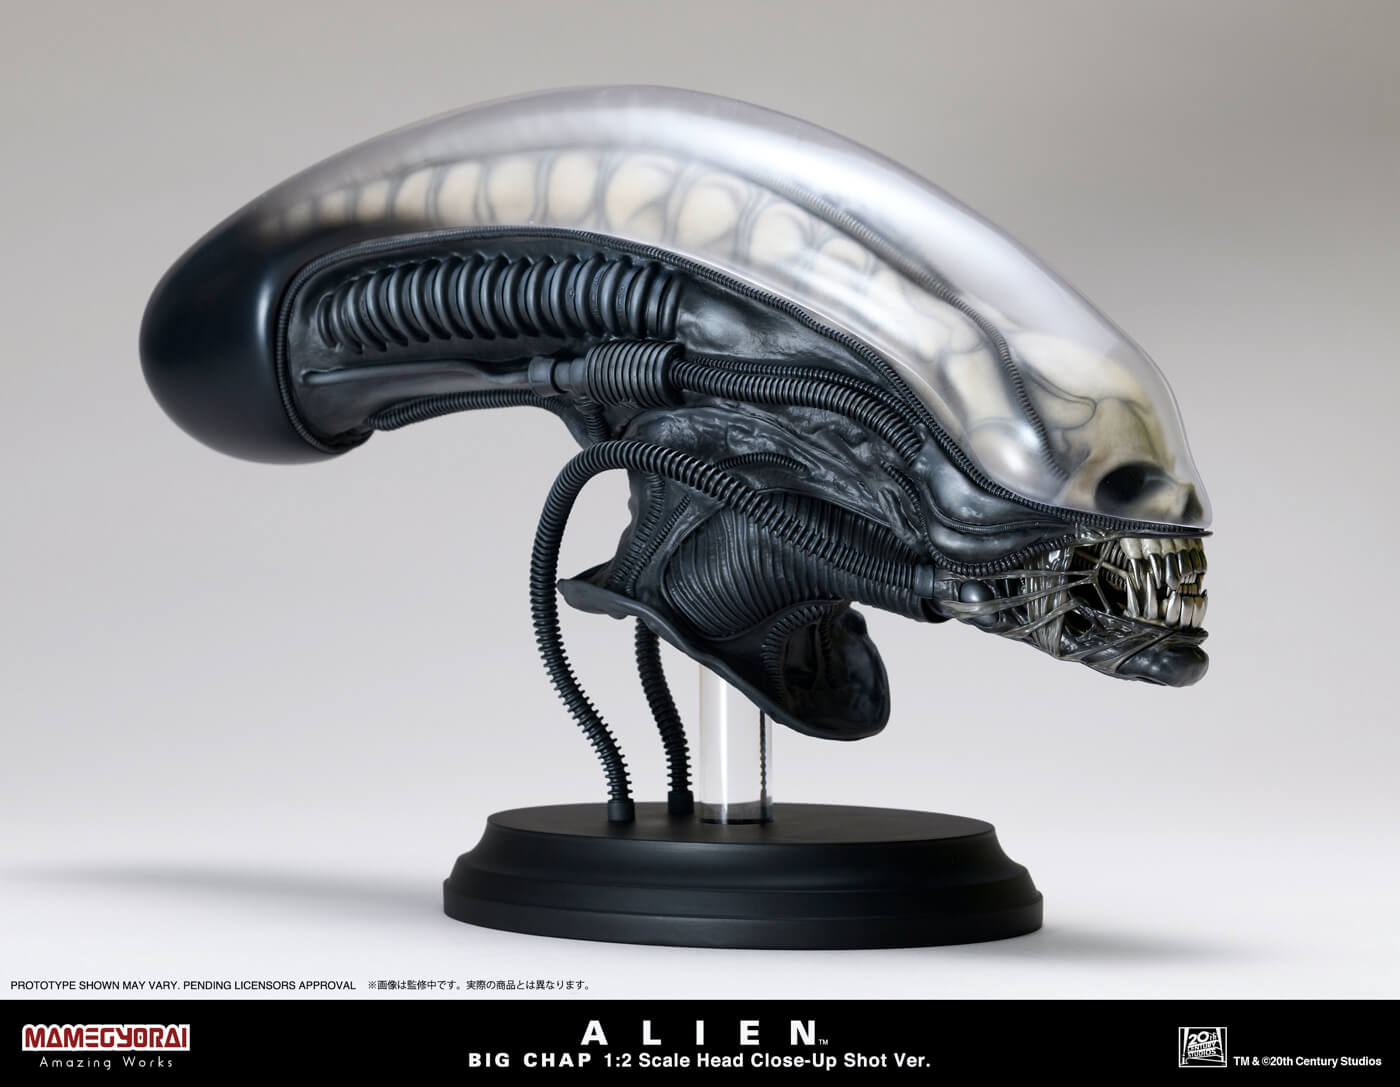 ALIEN BIG CHAP 1/2 SCALE HEAD Close Up Shot Ver.│Presented by